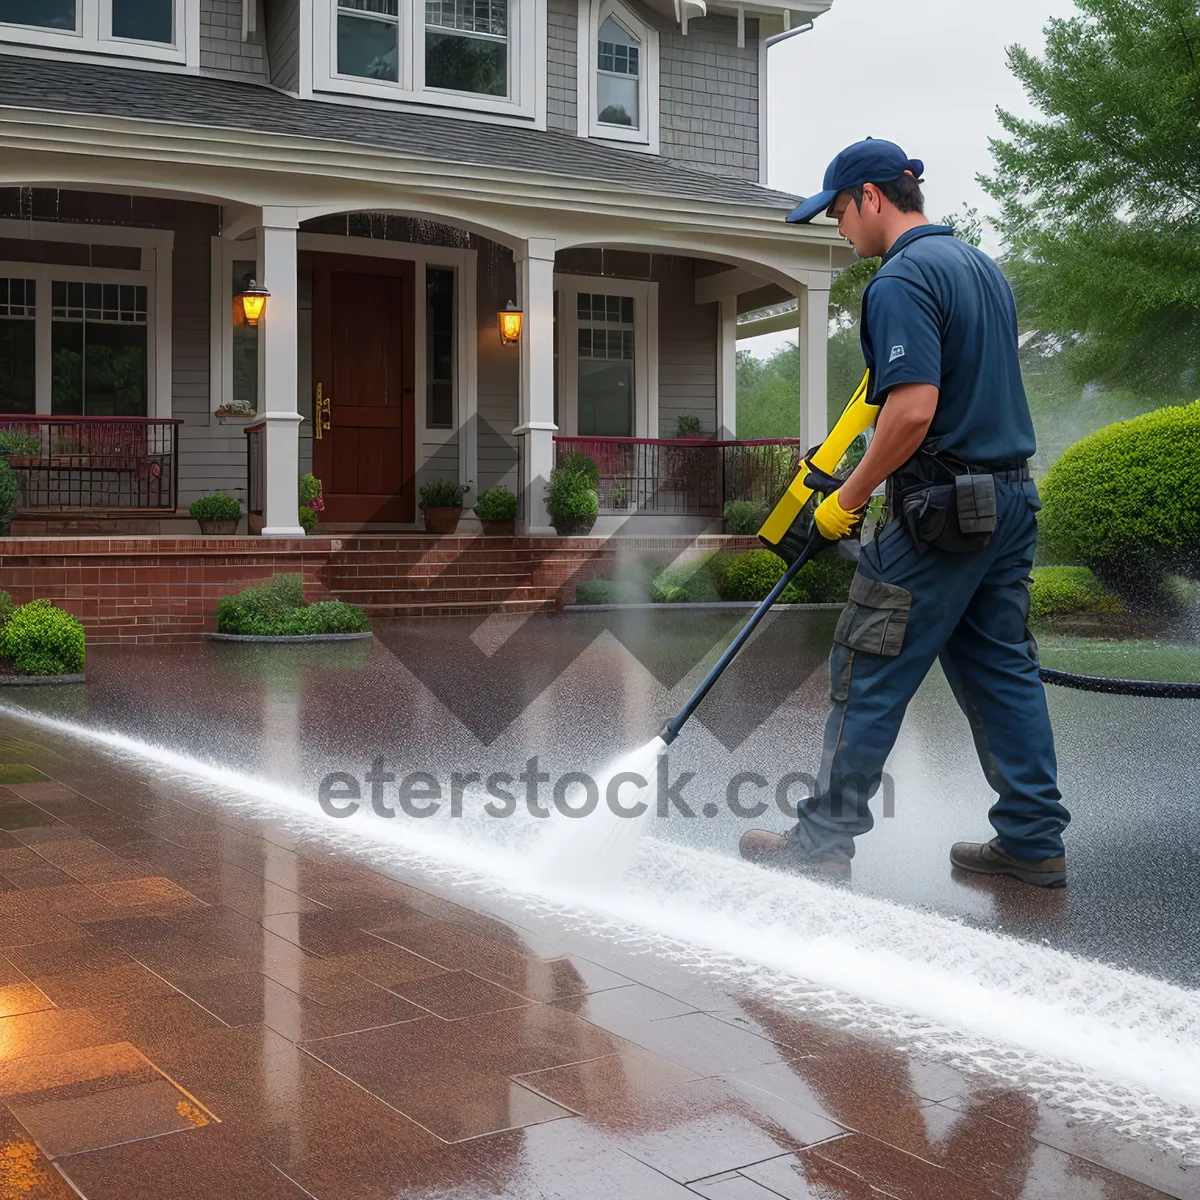 Picture of Active Man Cleaning Outdoors with Squeegee